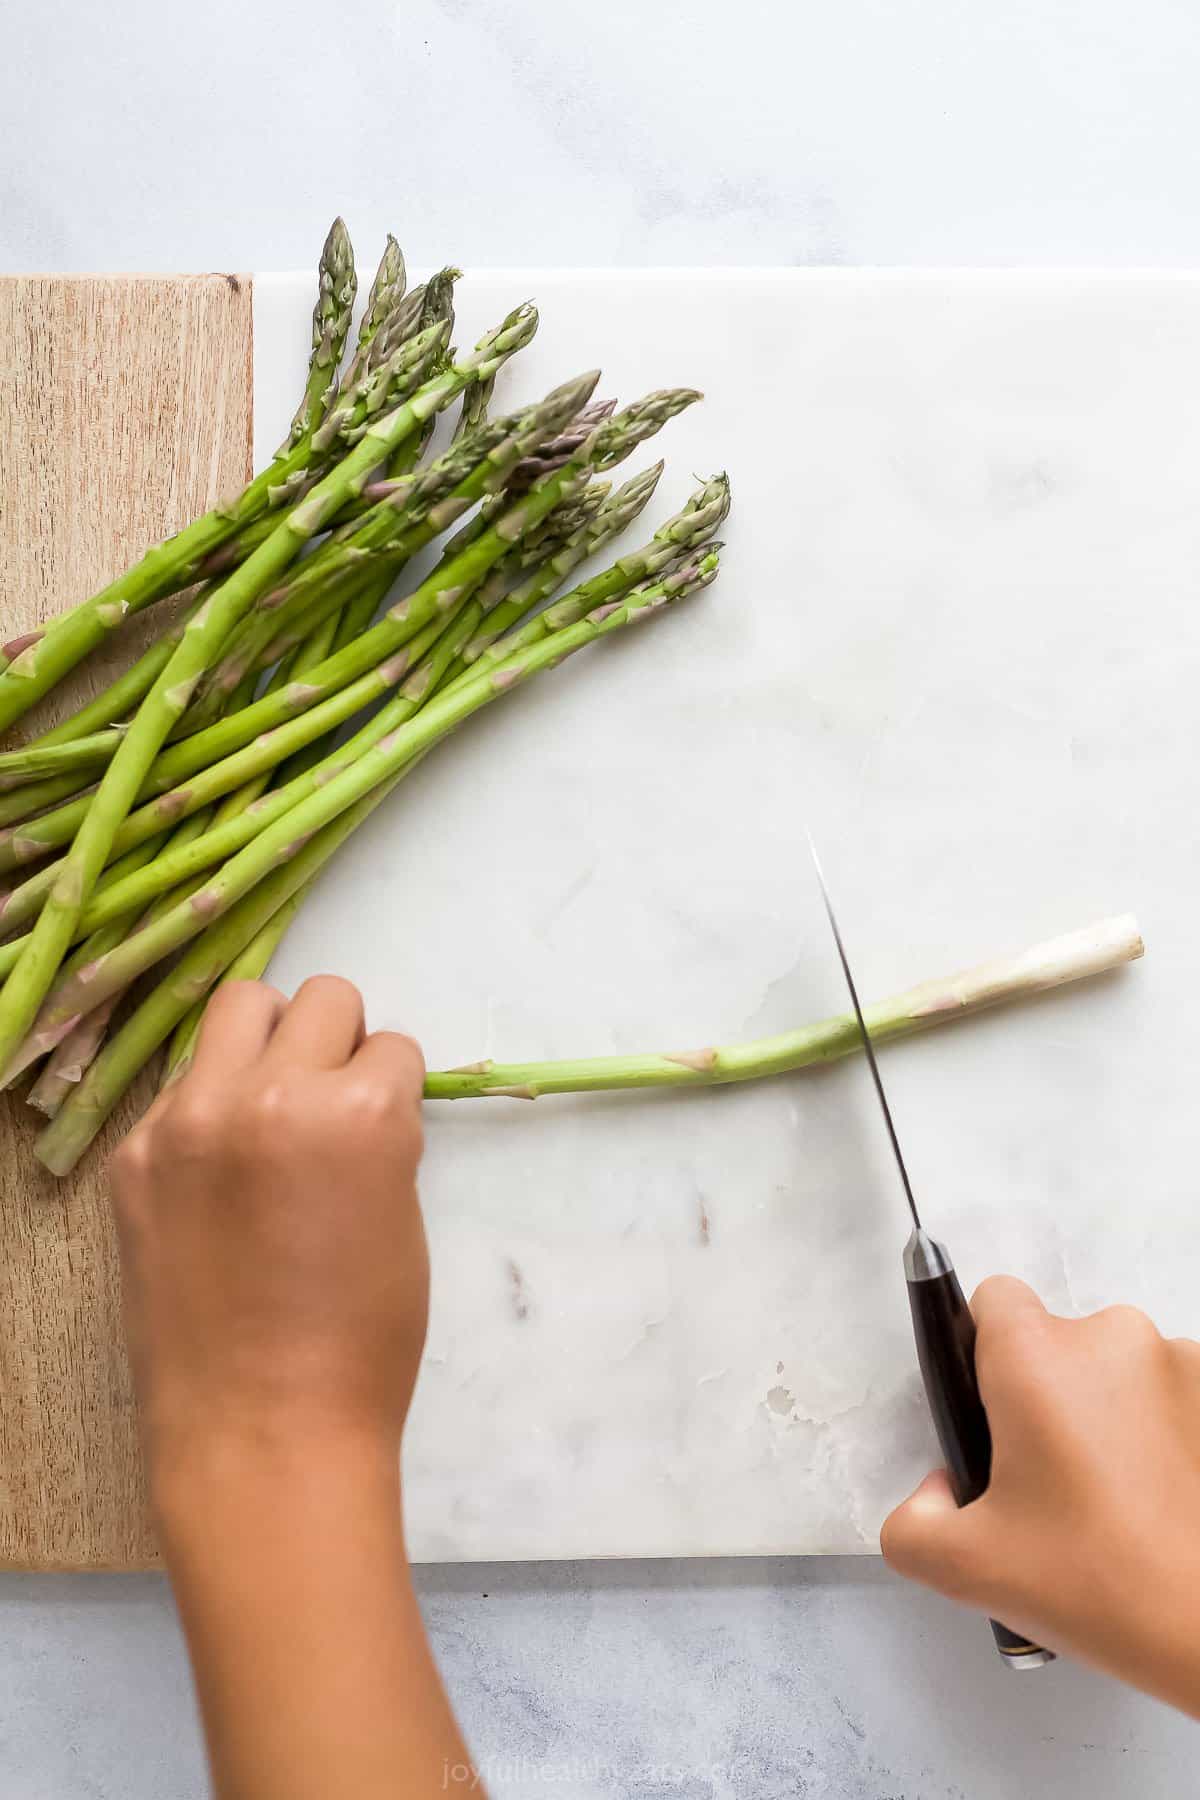 A sharp knife being used to cut the woody stem off a stalk of asparagus over a cutting board